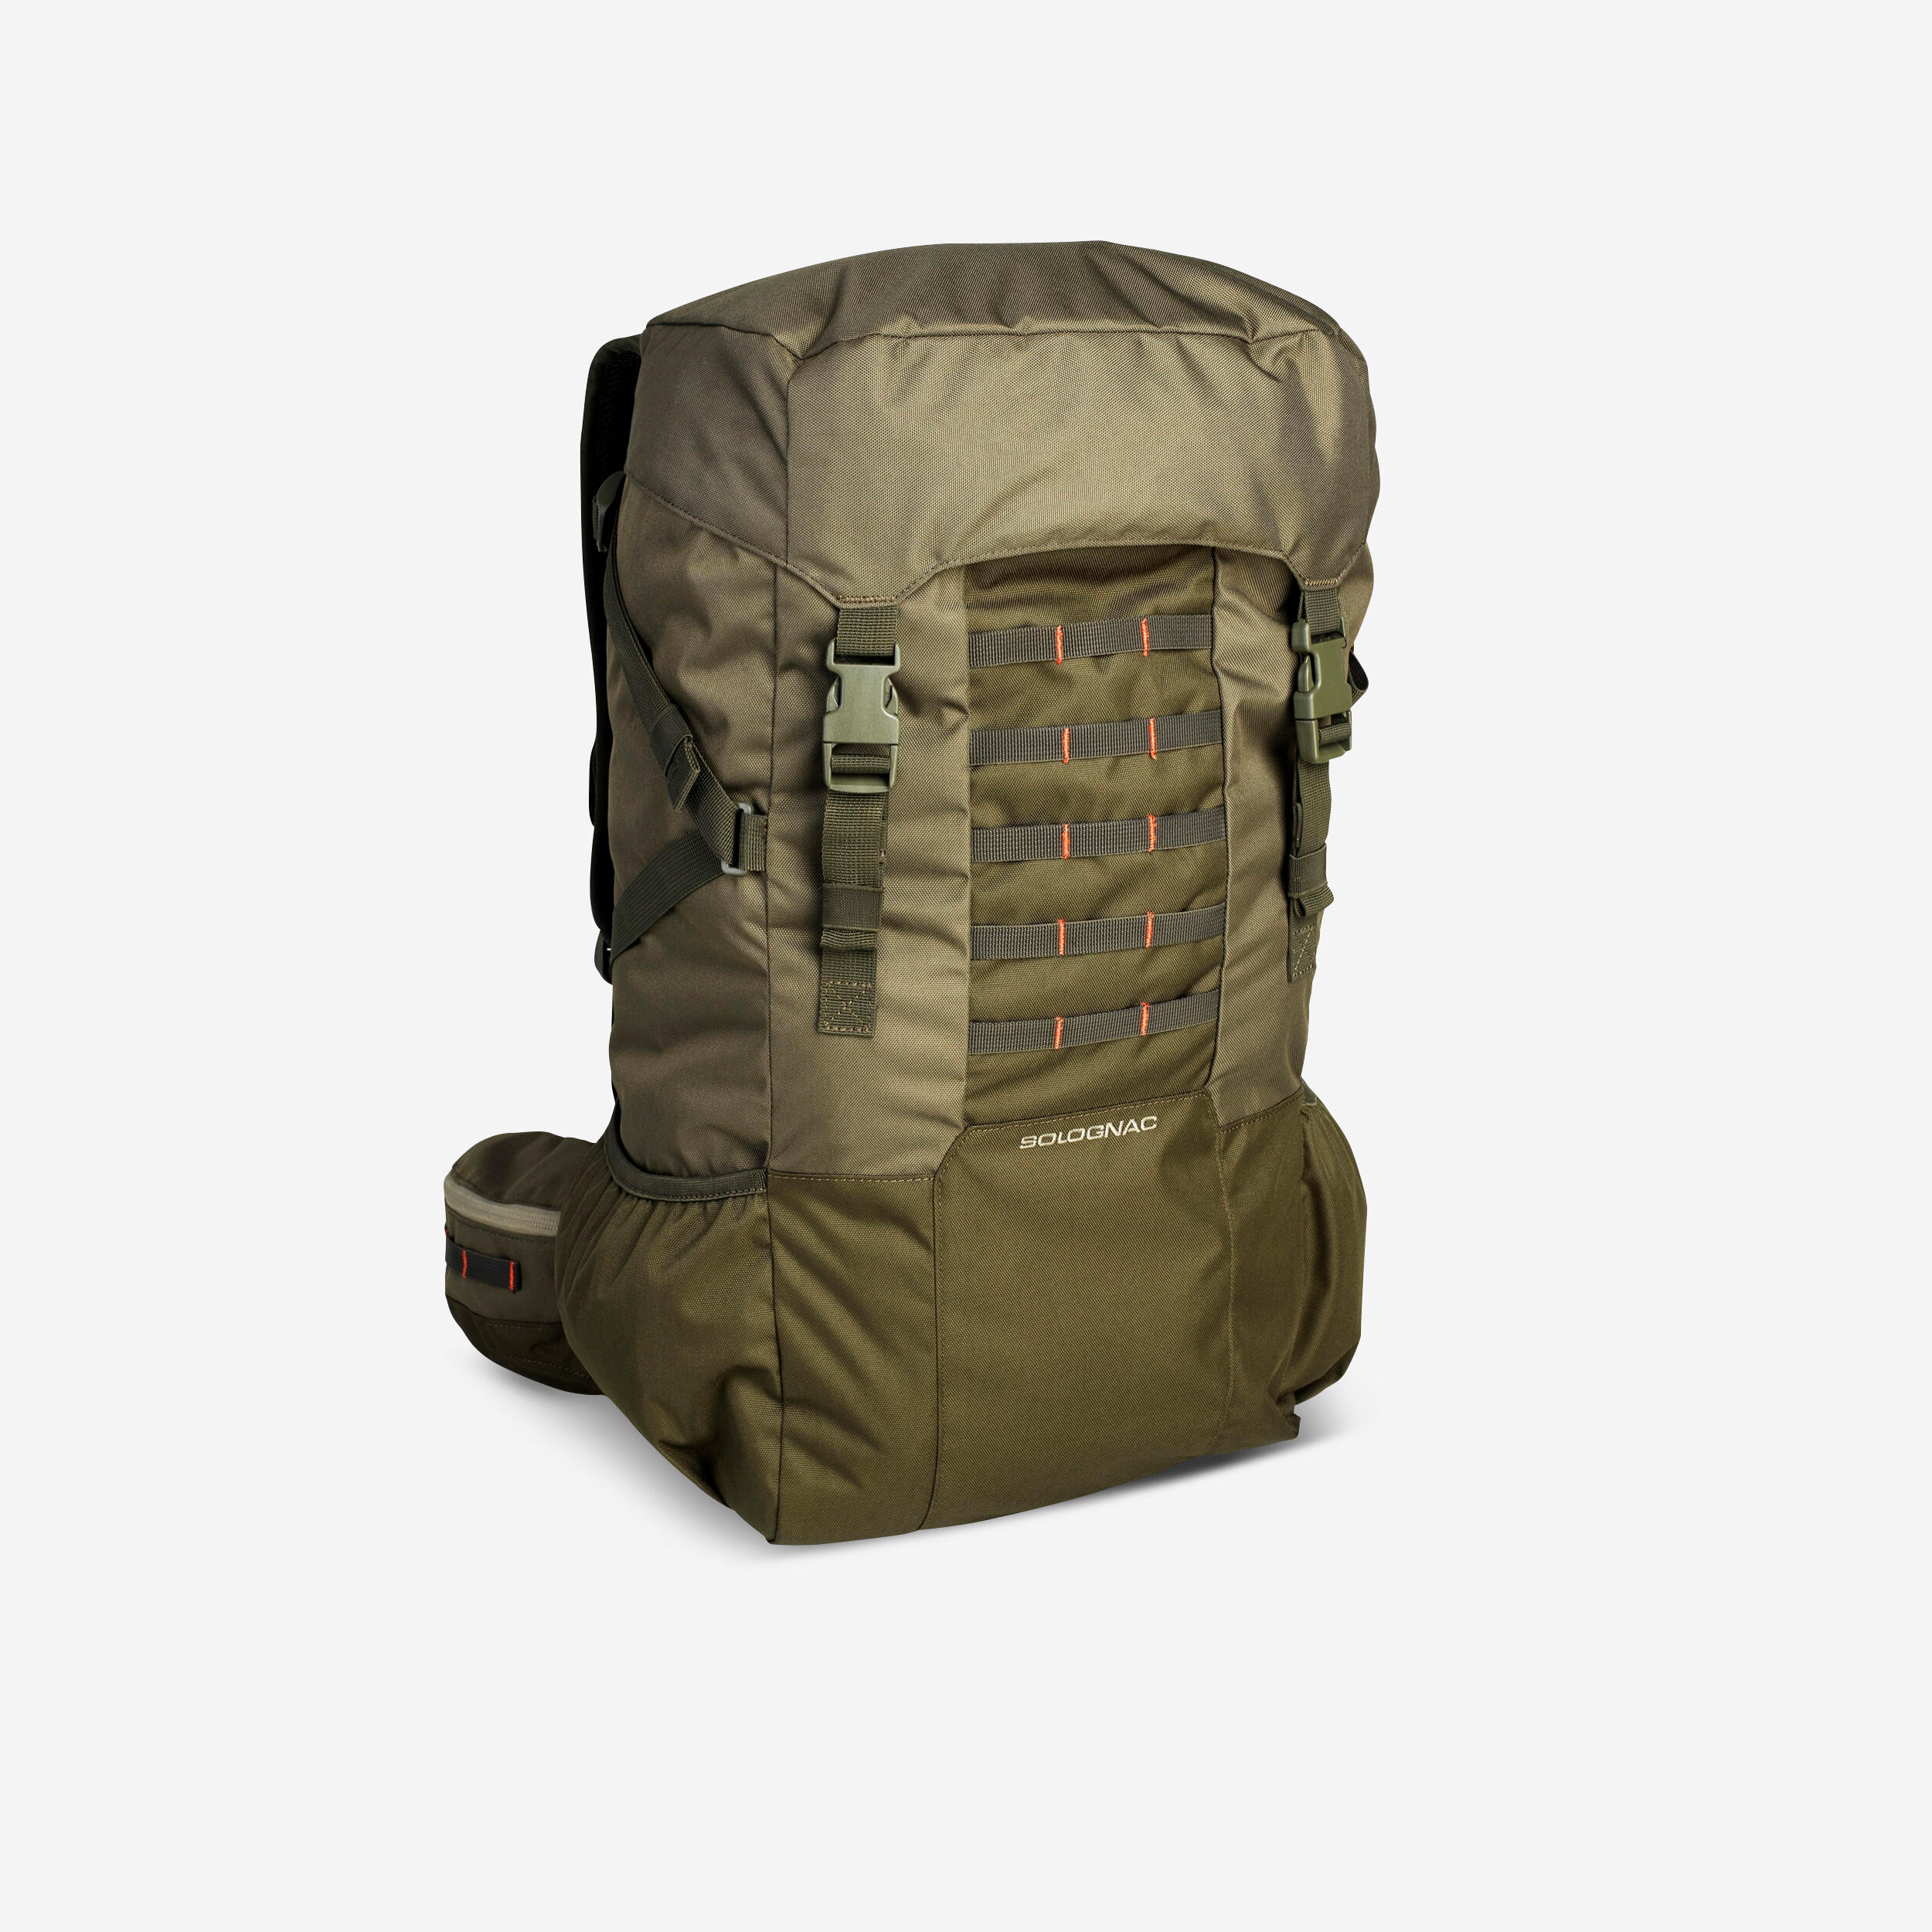 50L Backpack for Camping - Green 1/16